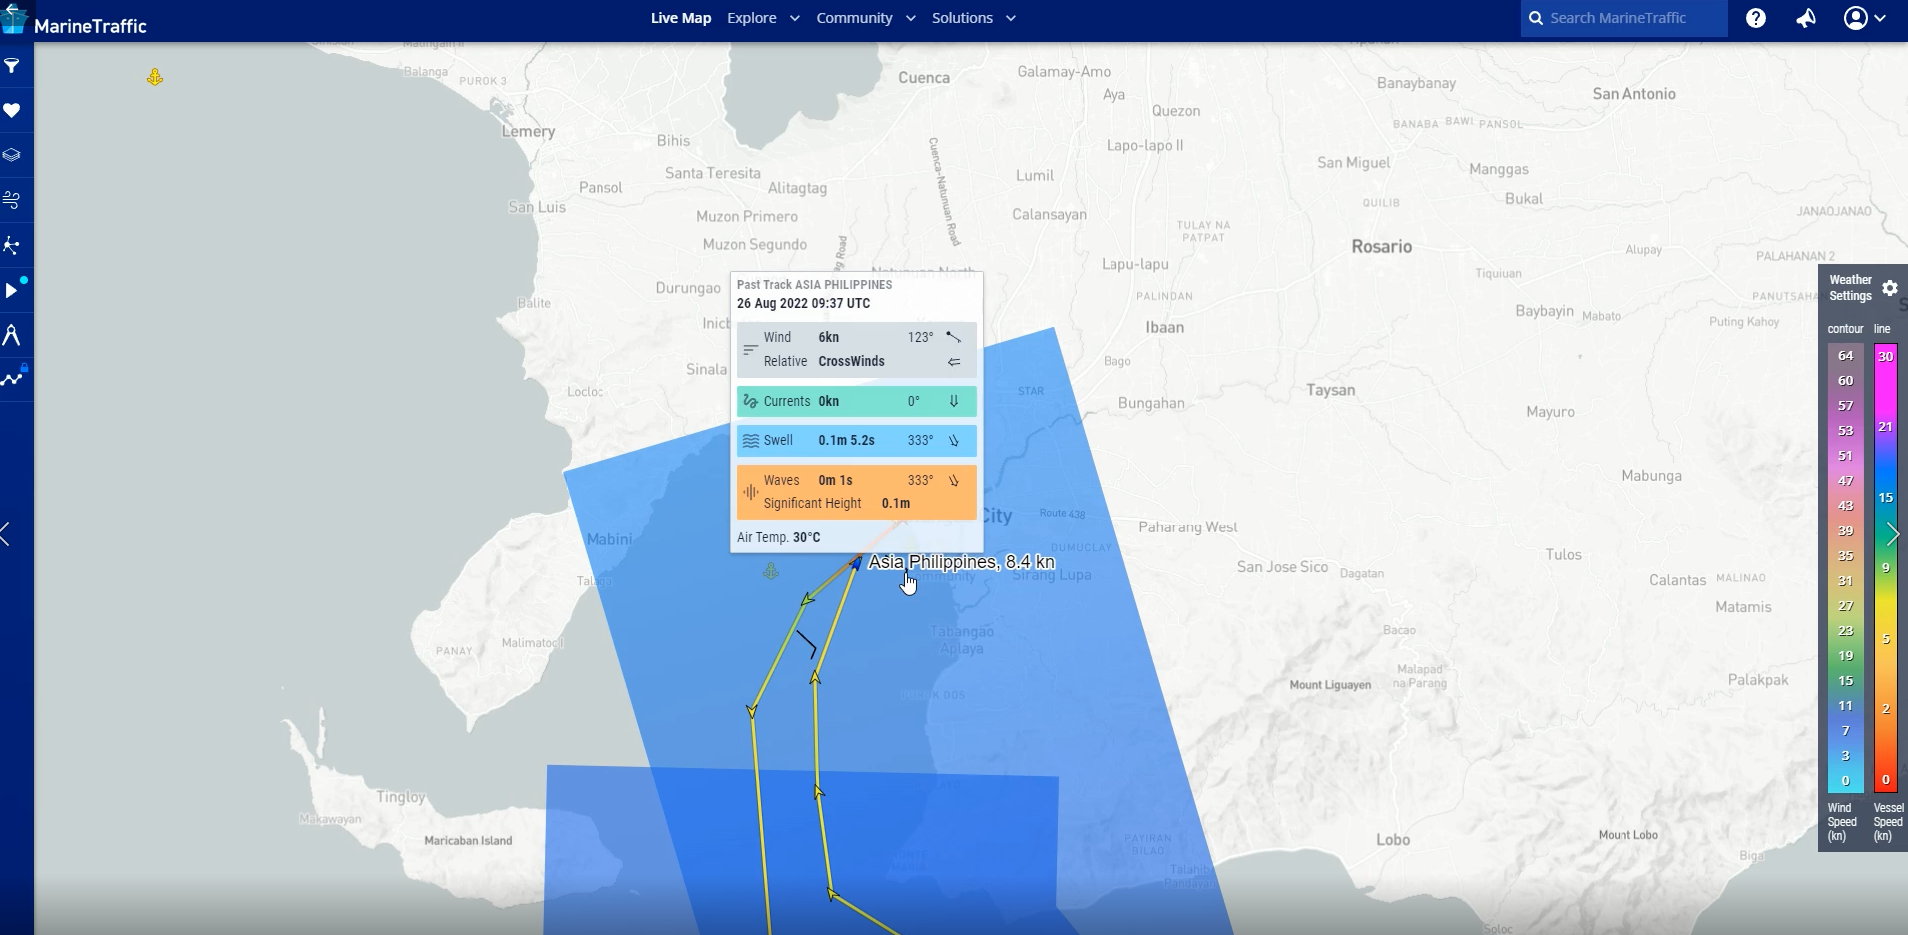 MarineTraffic data shows the weather conditions at a given point during the vessel’s journey